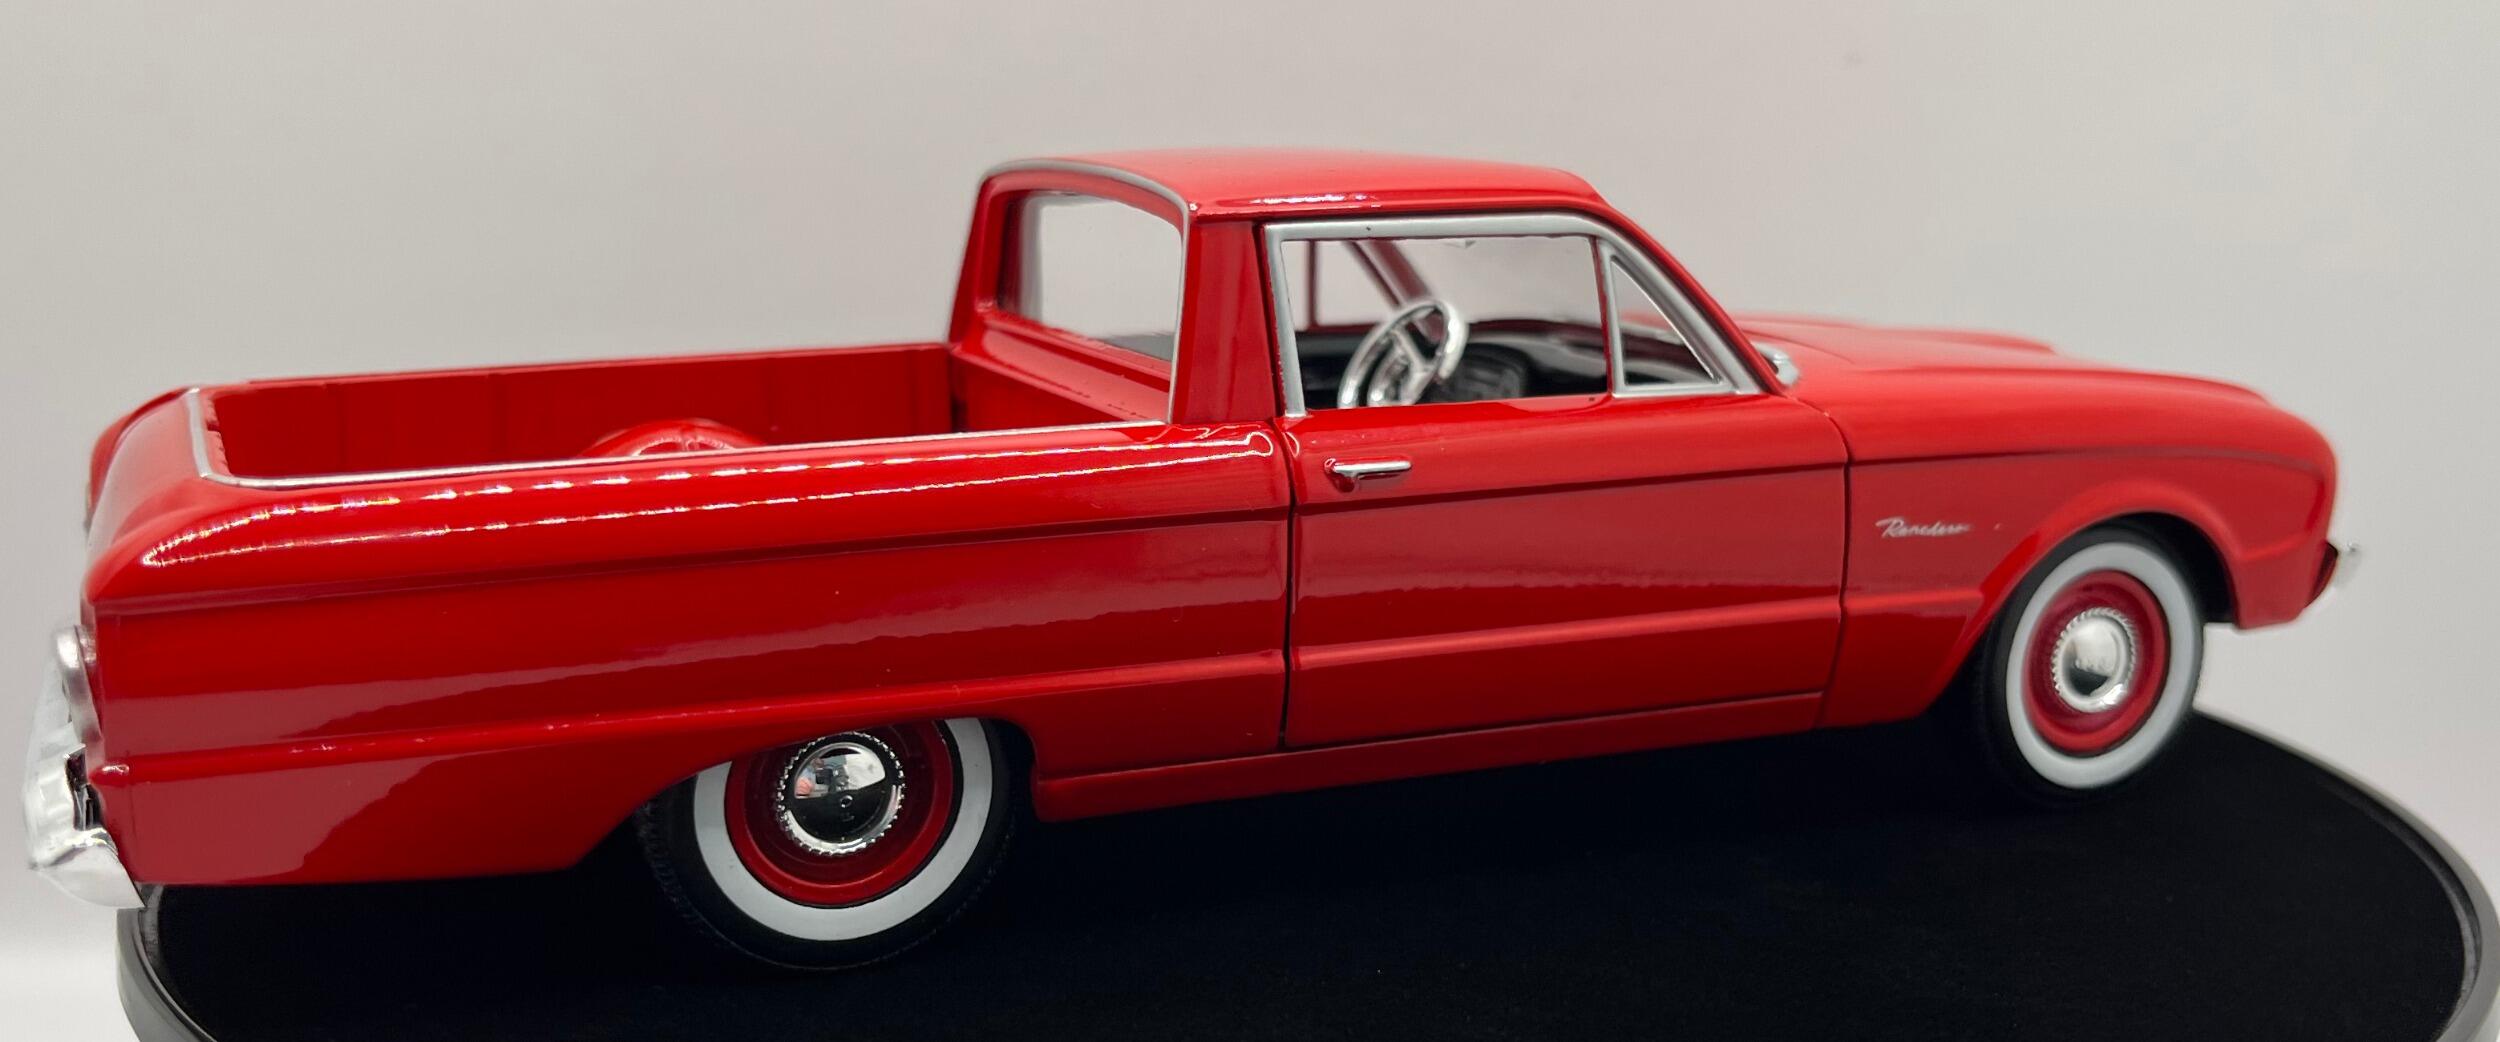 An excellent scale model of a Ford Ranchero decorated in red, chrome and red wheels with white rims. Other trims are finished in chrome and silver.